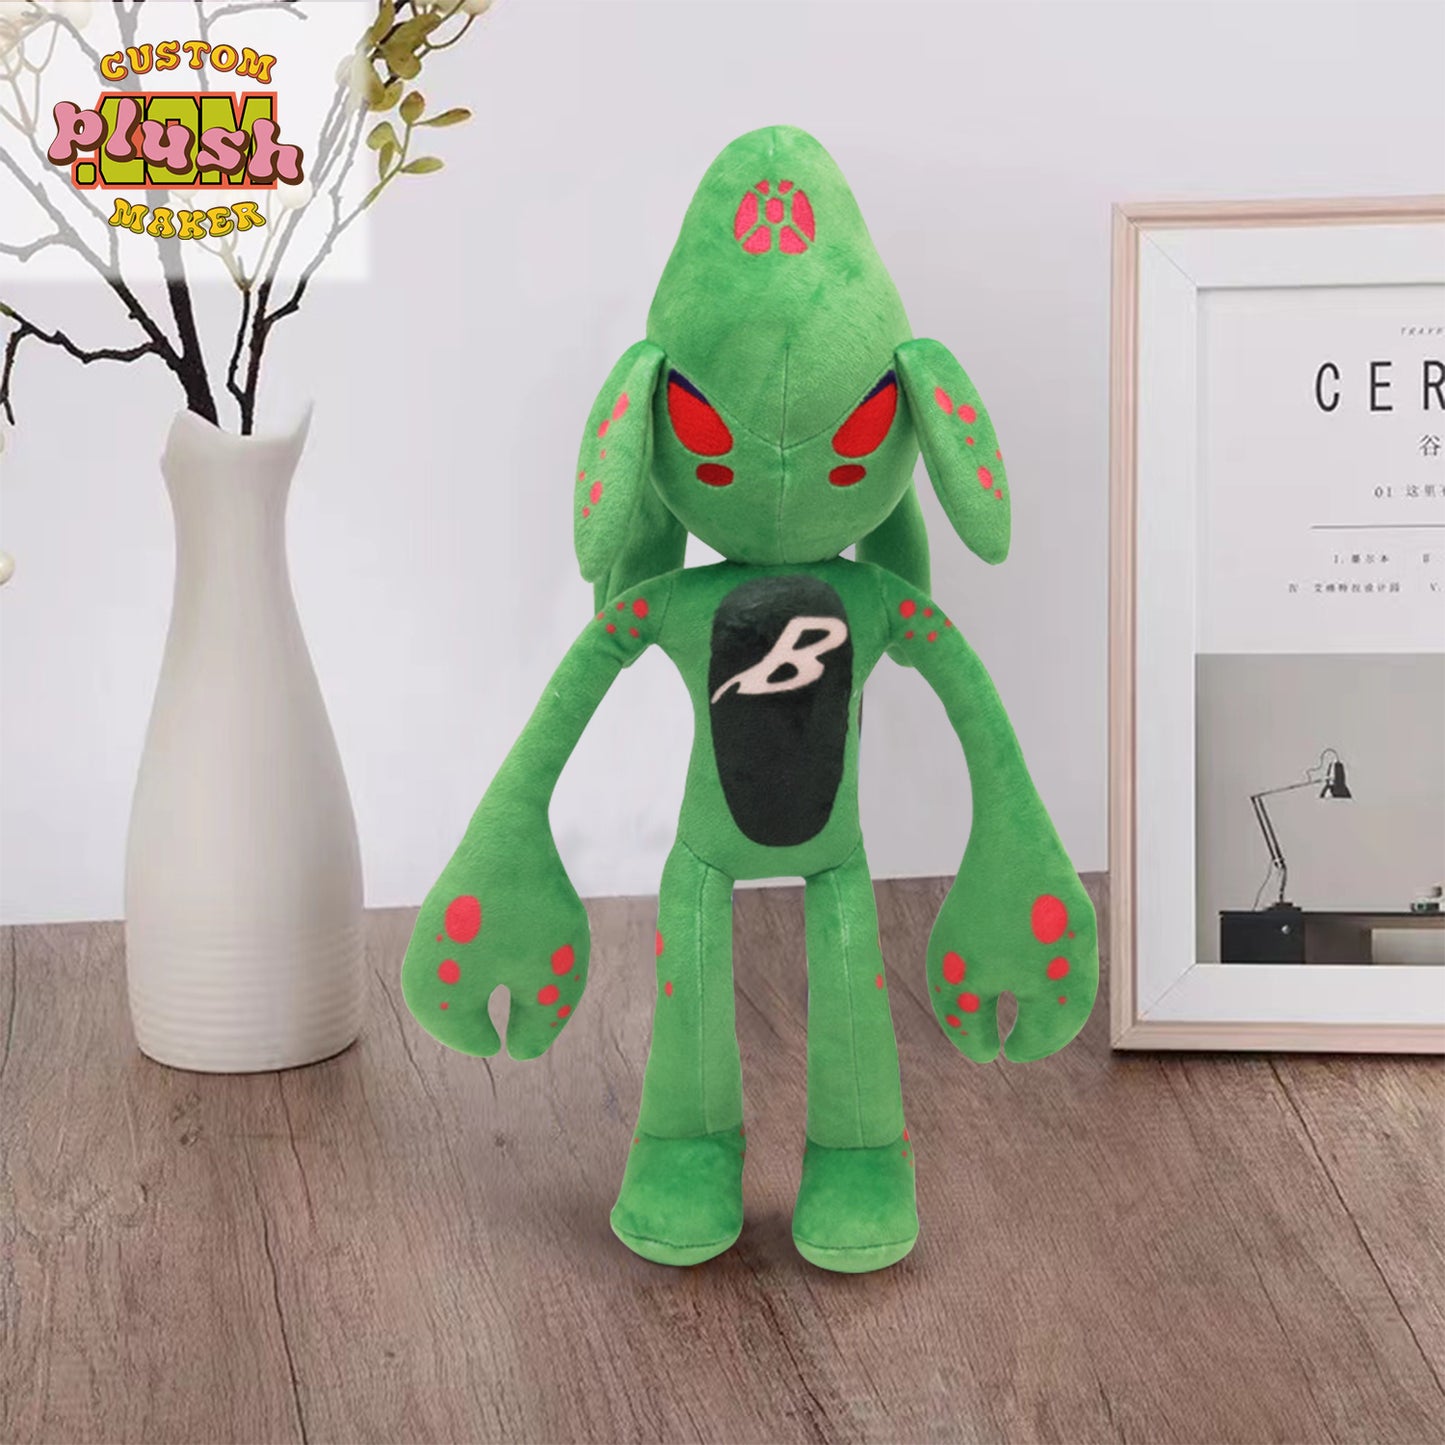 Alien Plush Toy – A whimsical stuffed toy featuring an adorable extraterrestrial design, perfect for adding a touch of intergalactic charm to your collection